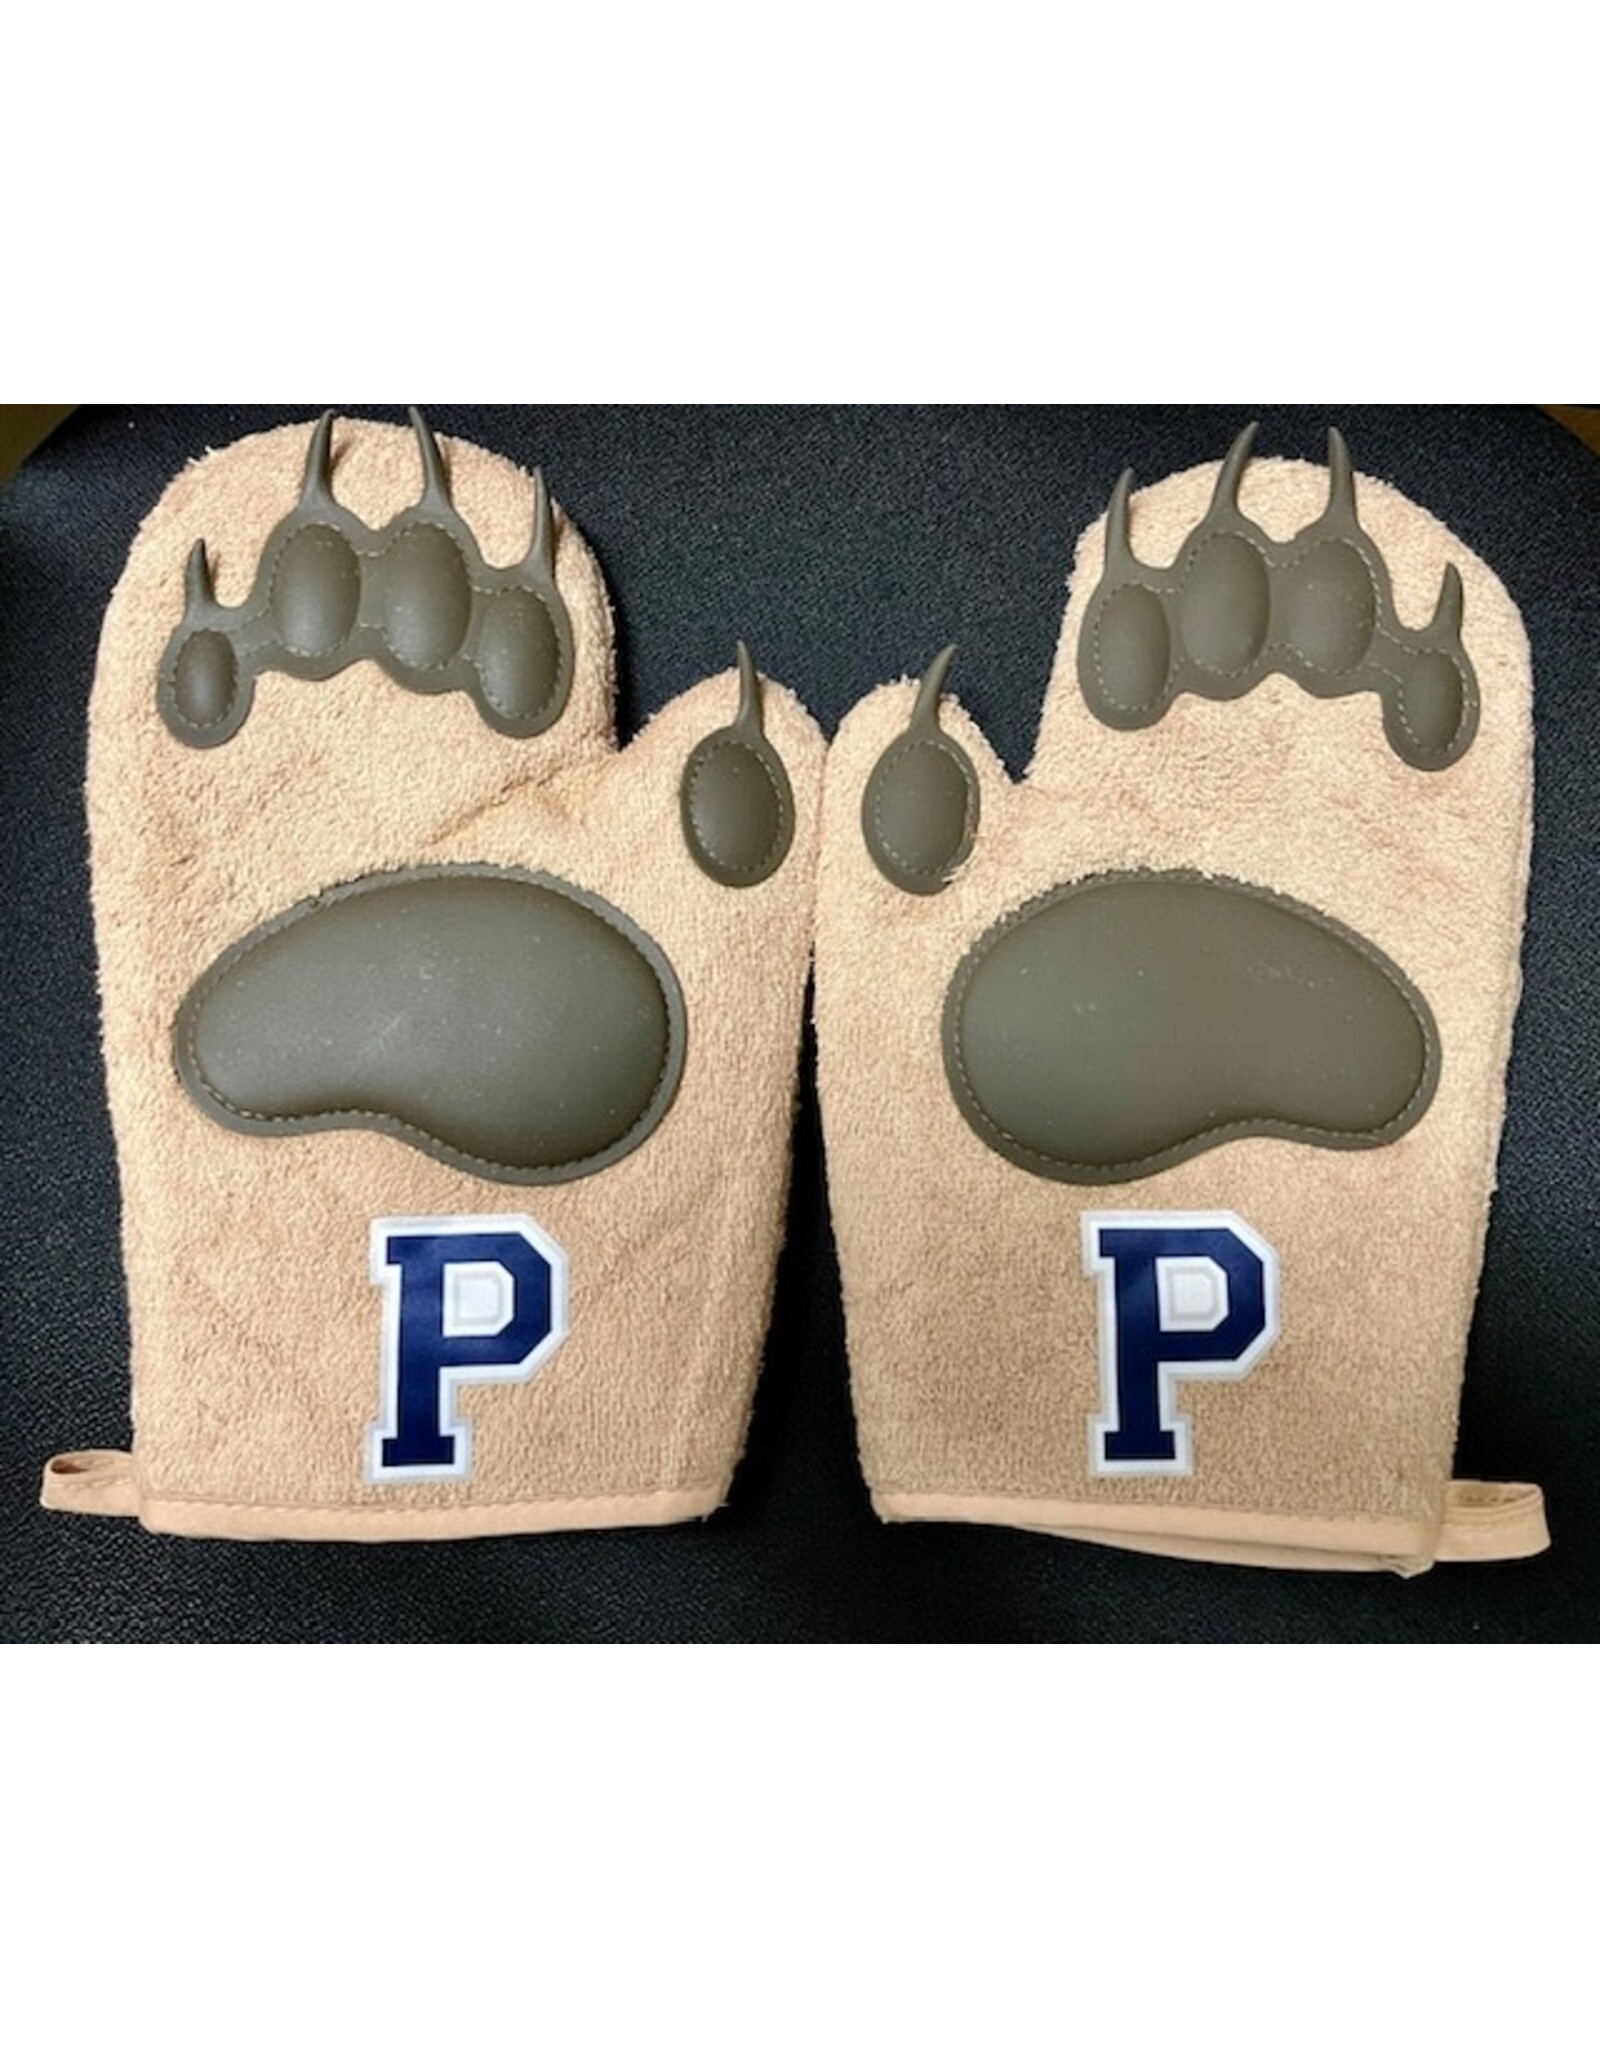 Bear Paw Oven Mitts